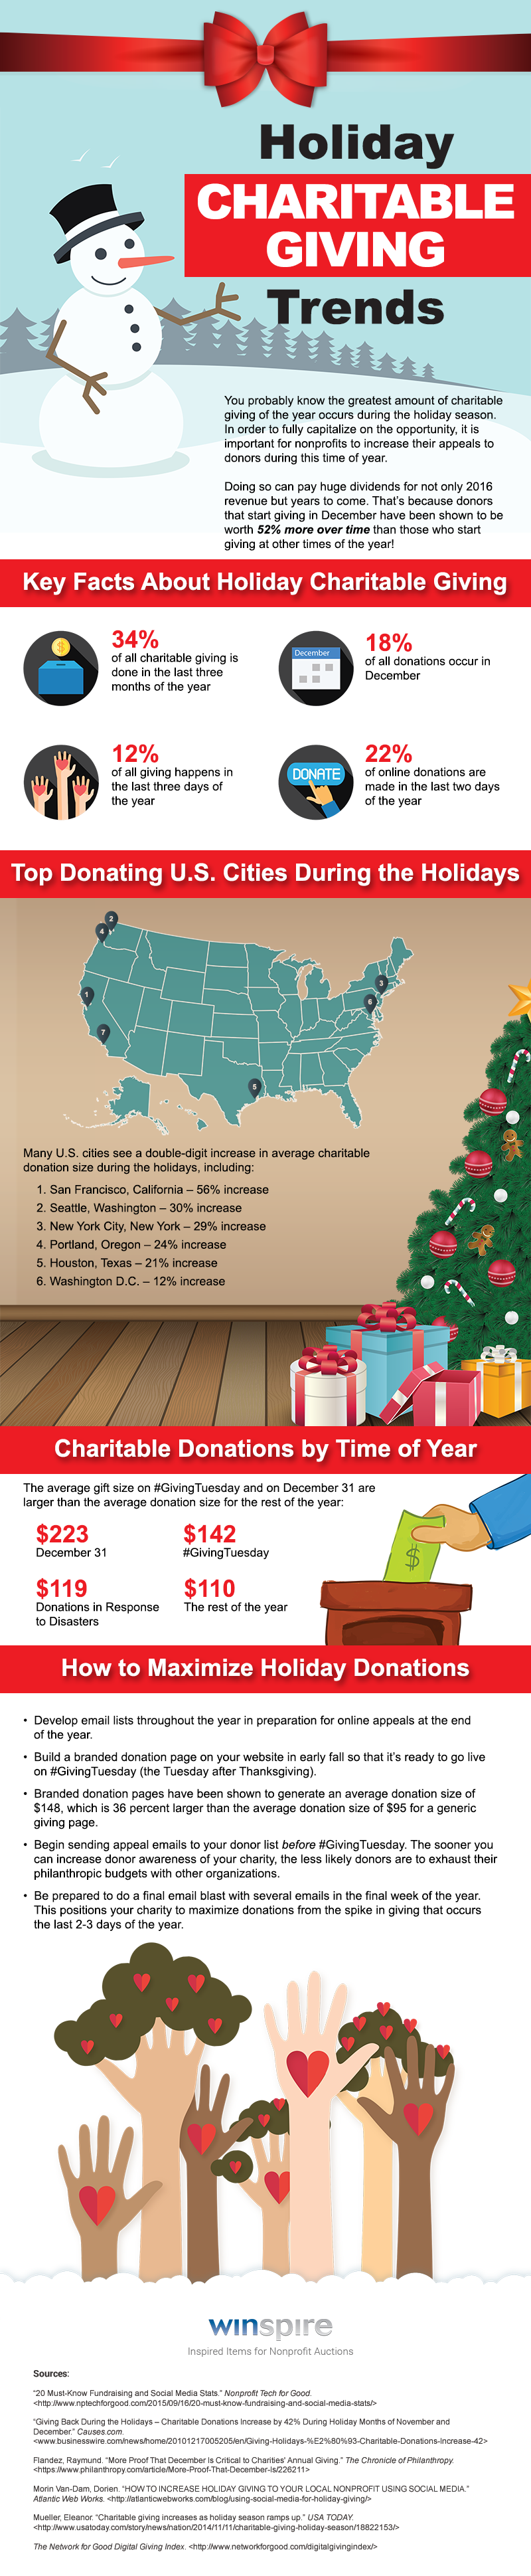 Holiday_Charitable_Giving_Trends.png